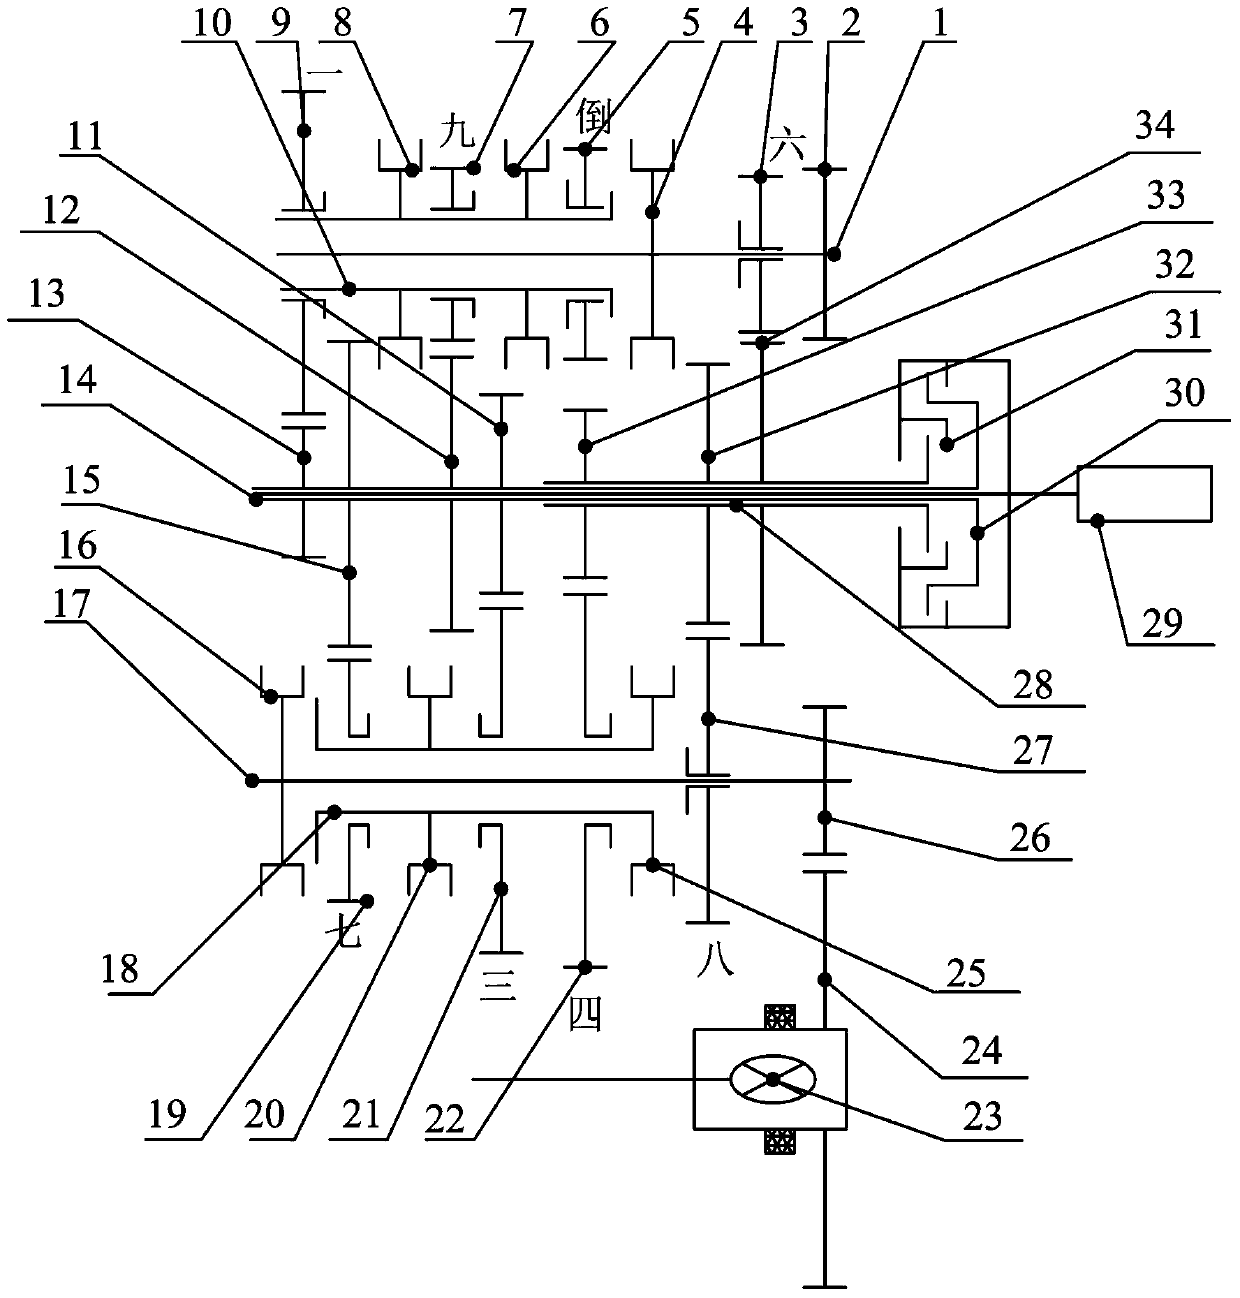 Multi-speed dual-clutch transmission and vehicle